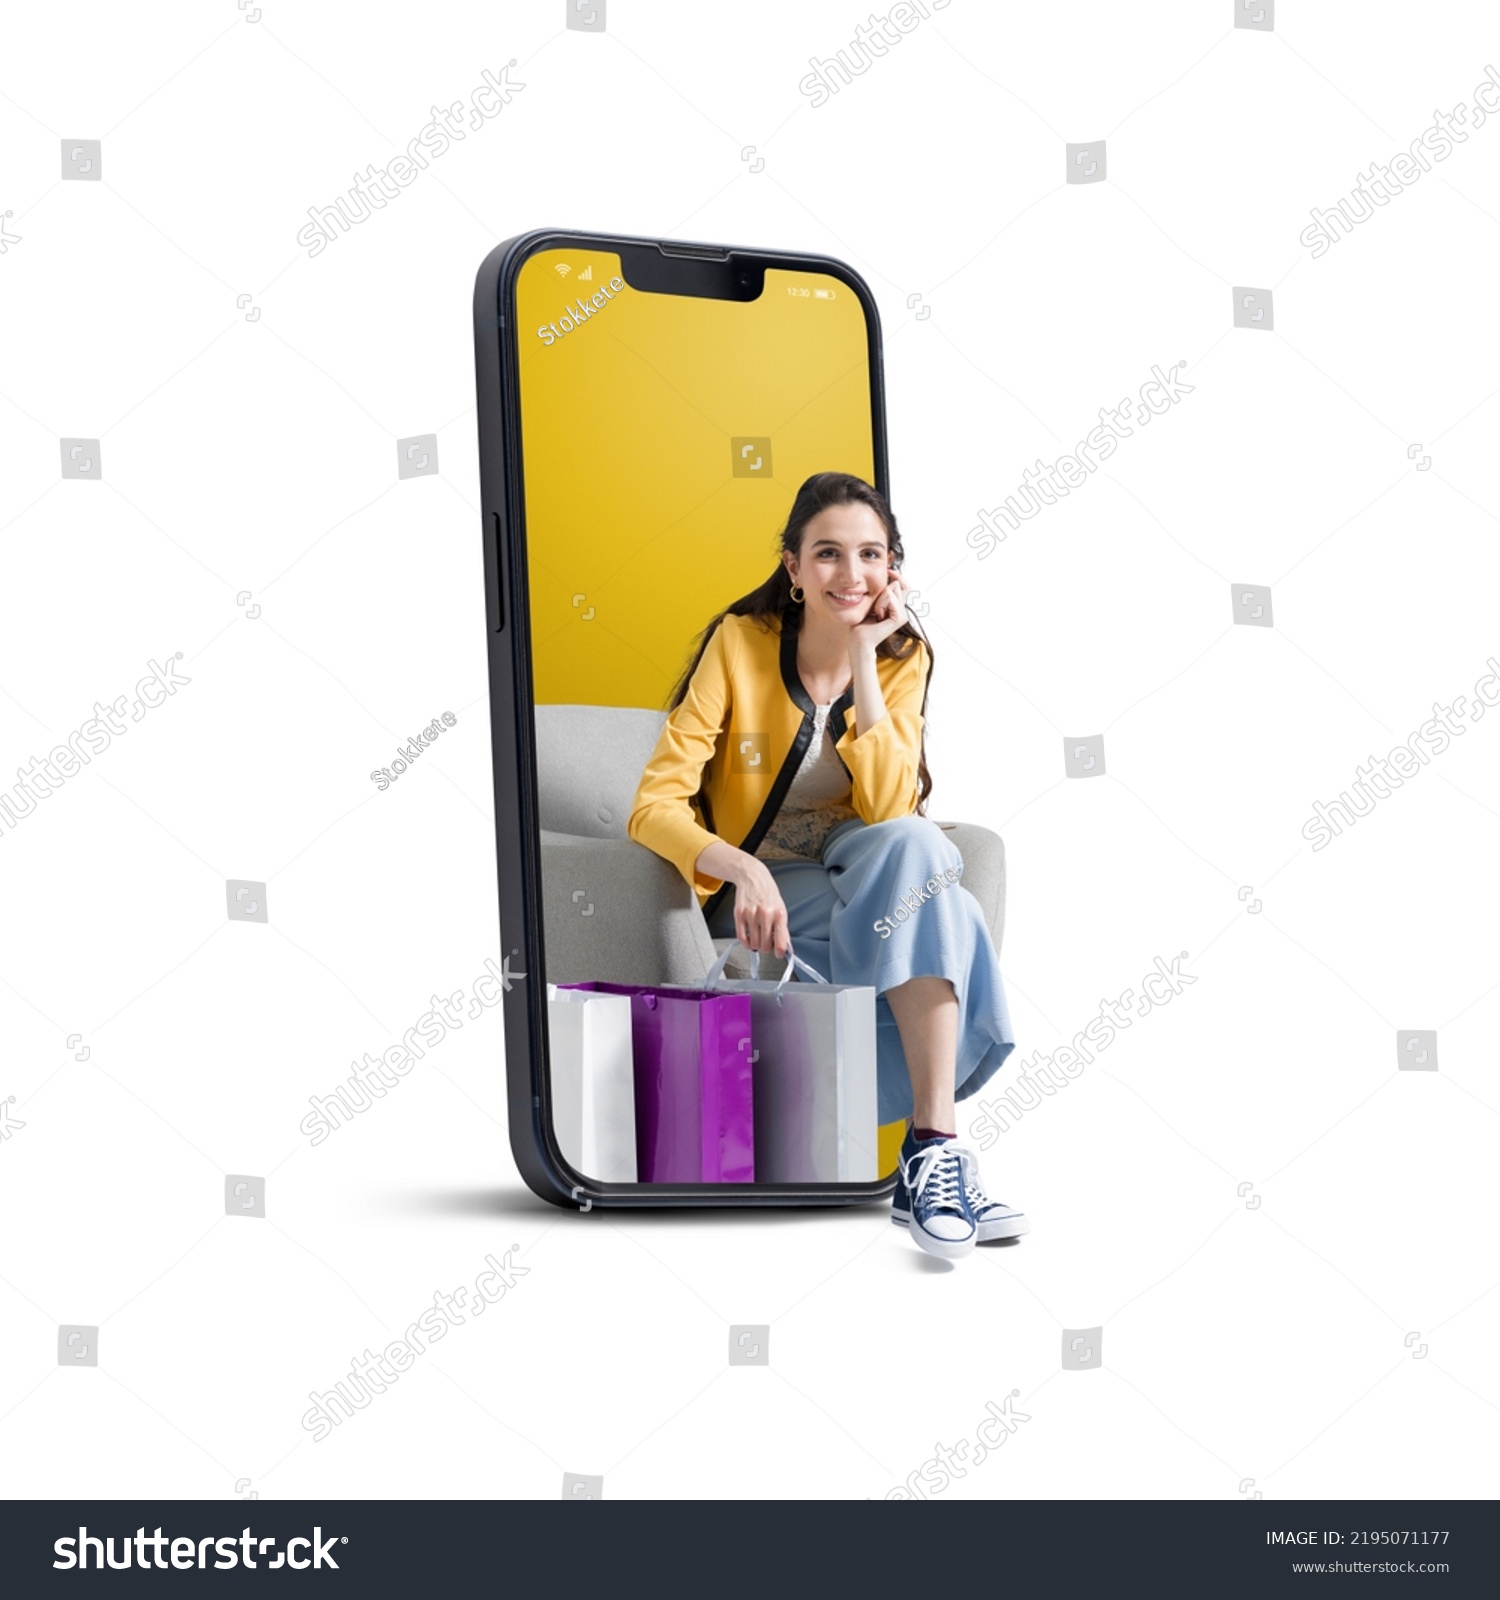 Happy young woman with shopping bags in a smartphone, online shopping and sales concept, isolated on white background #2195071177